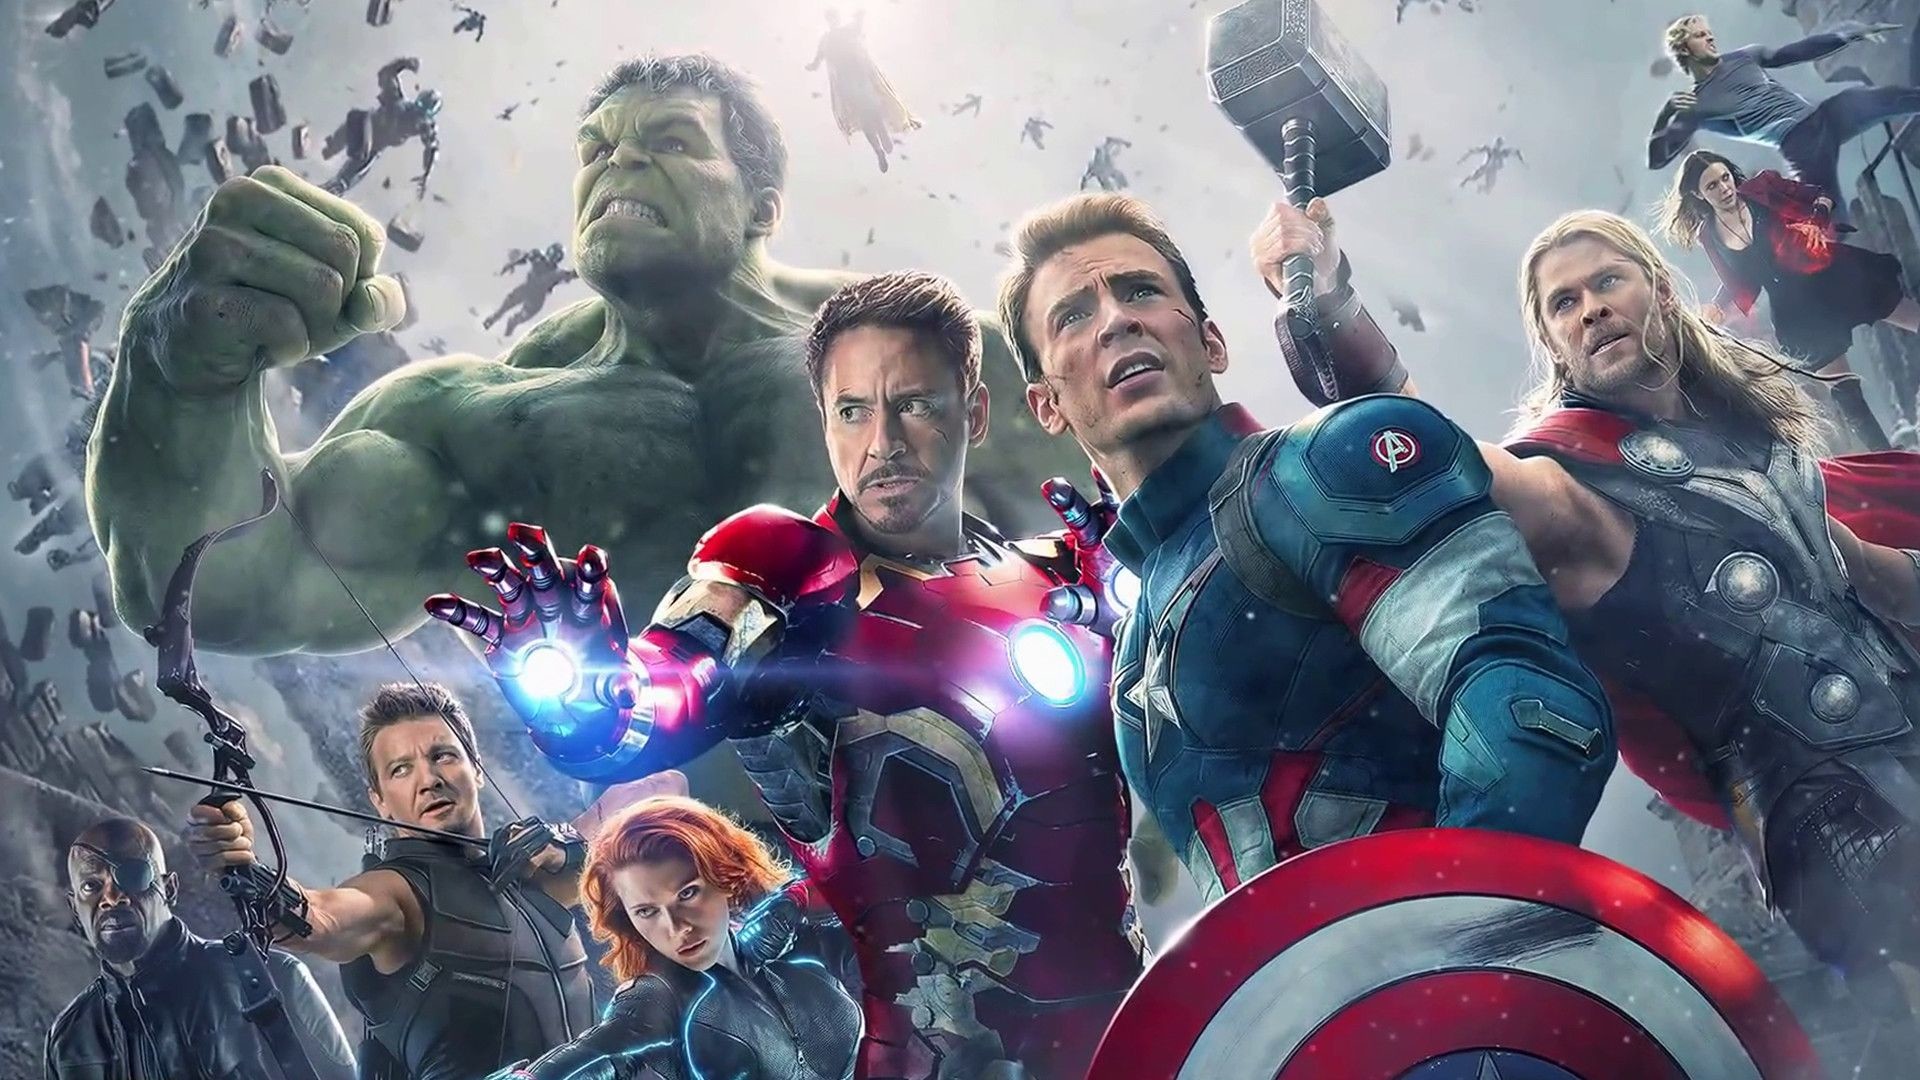 1920x1080 1922x1082 Top Wallpapers 2016: The Avengers 2 Wallpapers, Wonderful The  ...">